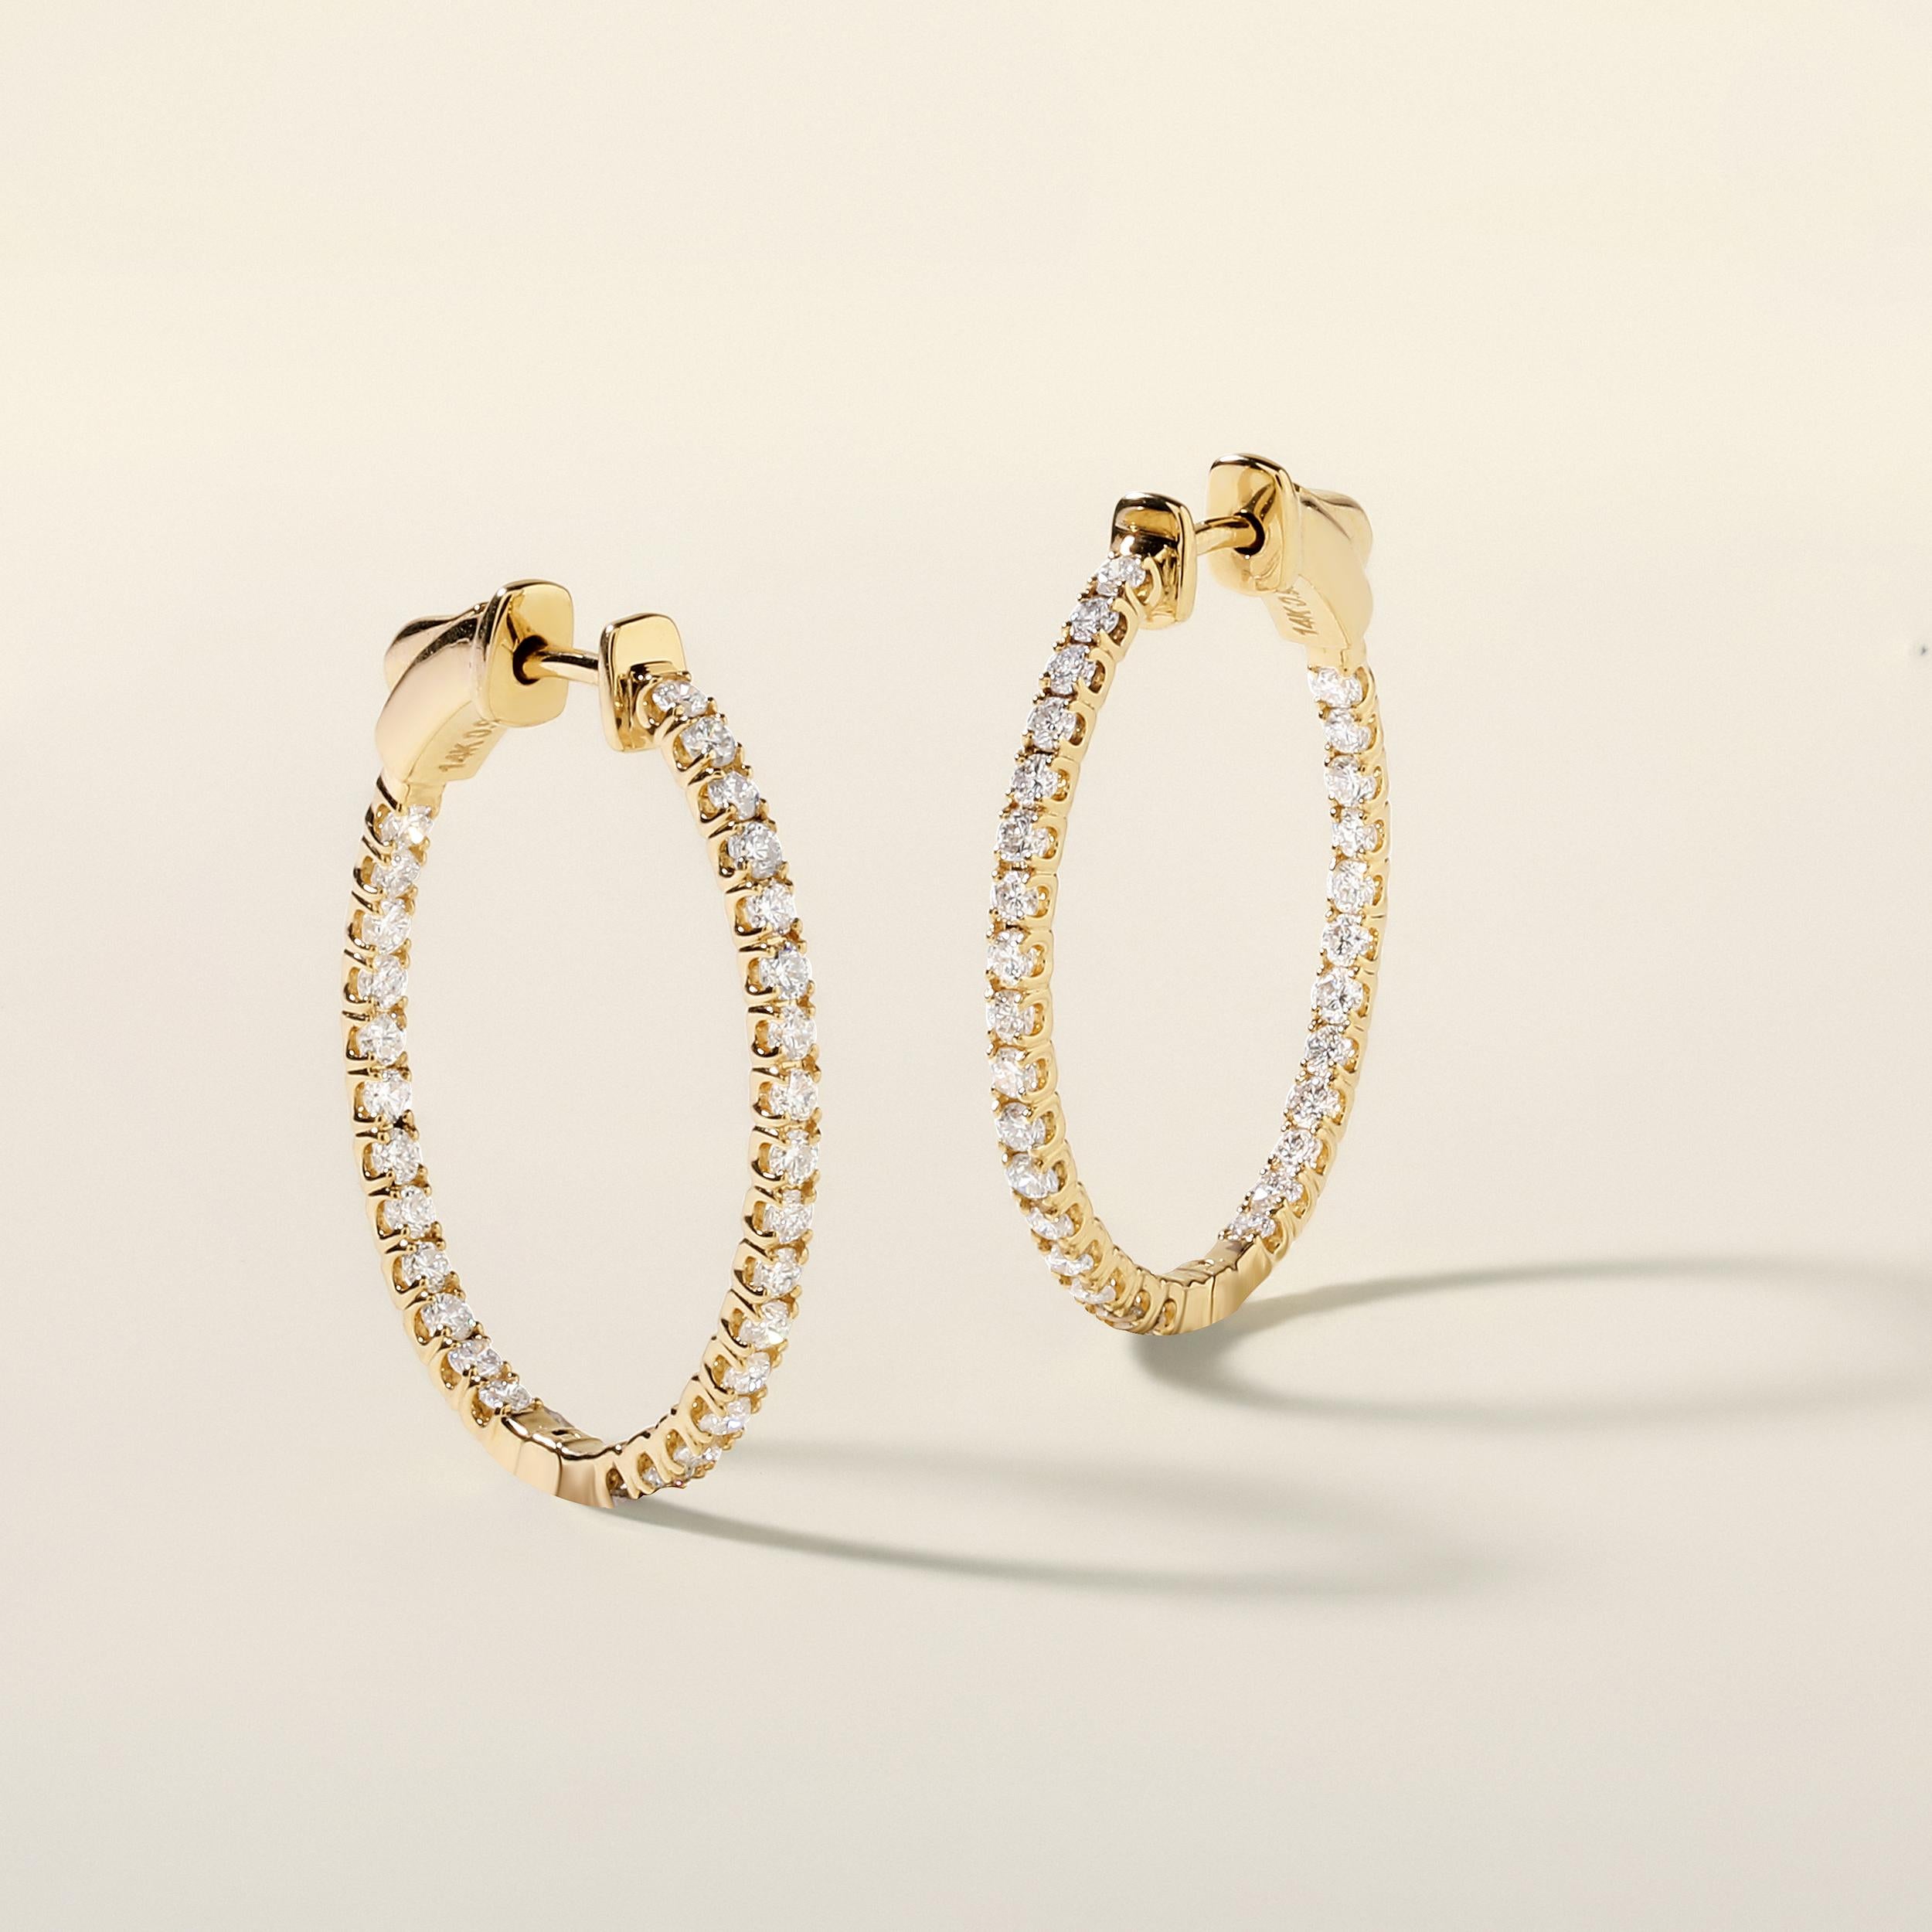 Crafted in 3.55 grams of 14K Yellow Gold, the earrings contains 58 stones of Round Diamonds with a total of 0.98 carat in G-H color and SI clarity.

CONTEMPORARY AND TIMELESS ESSENCE: Crafted in 14-karat/18-karat with 100% natural diamond and